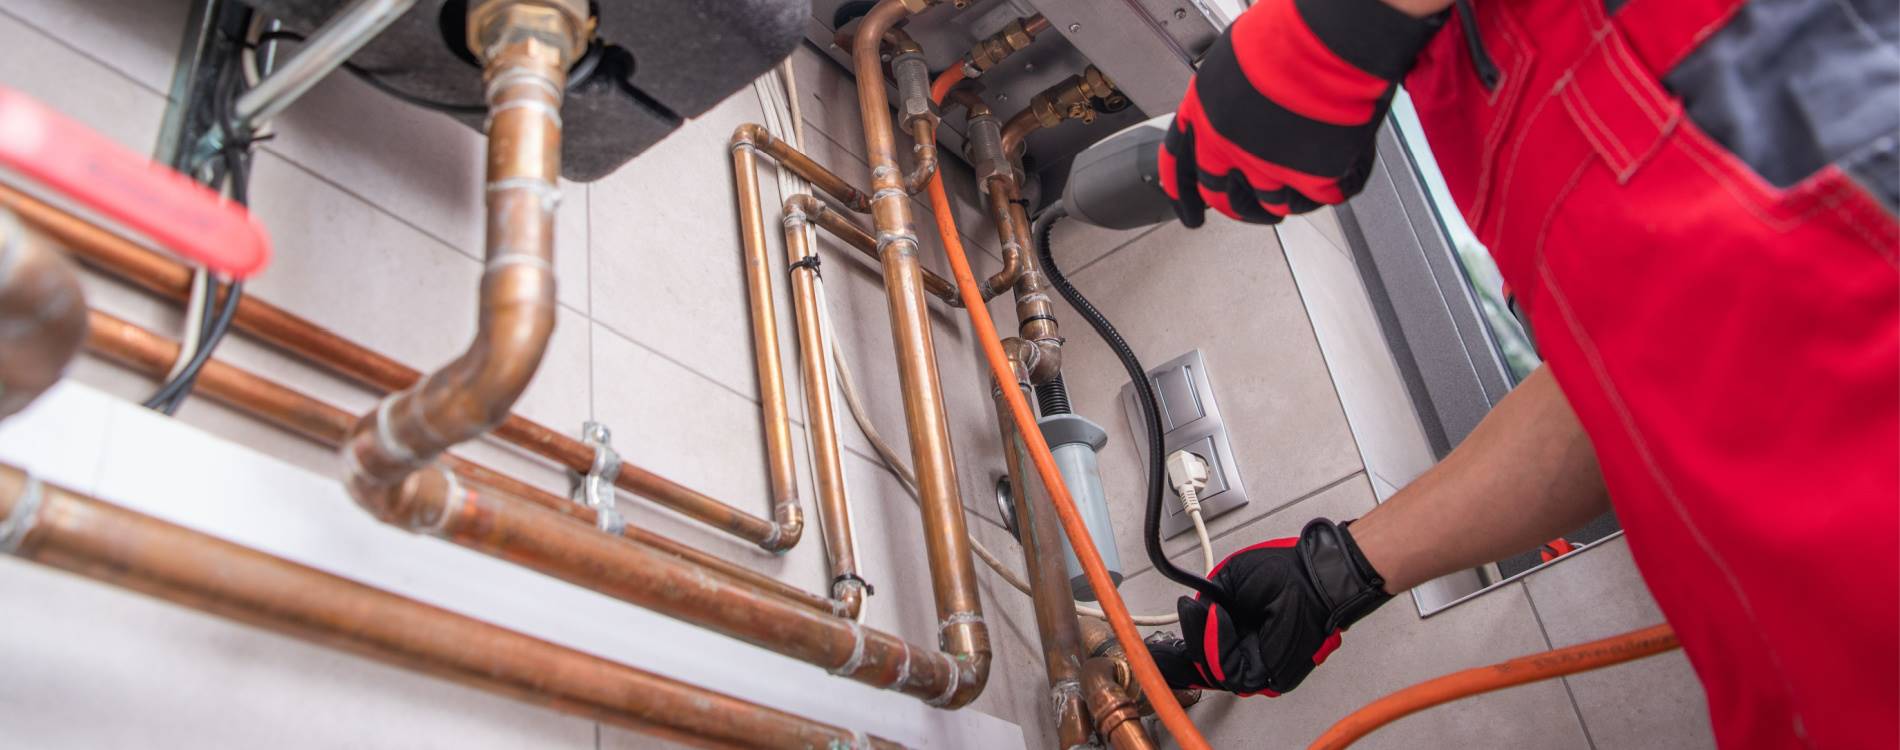 How To Manage A Large Commercial Plumbing Project